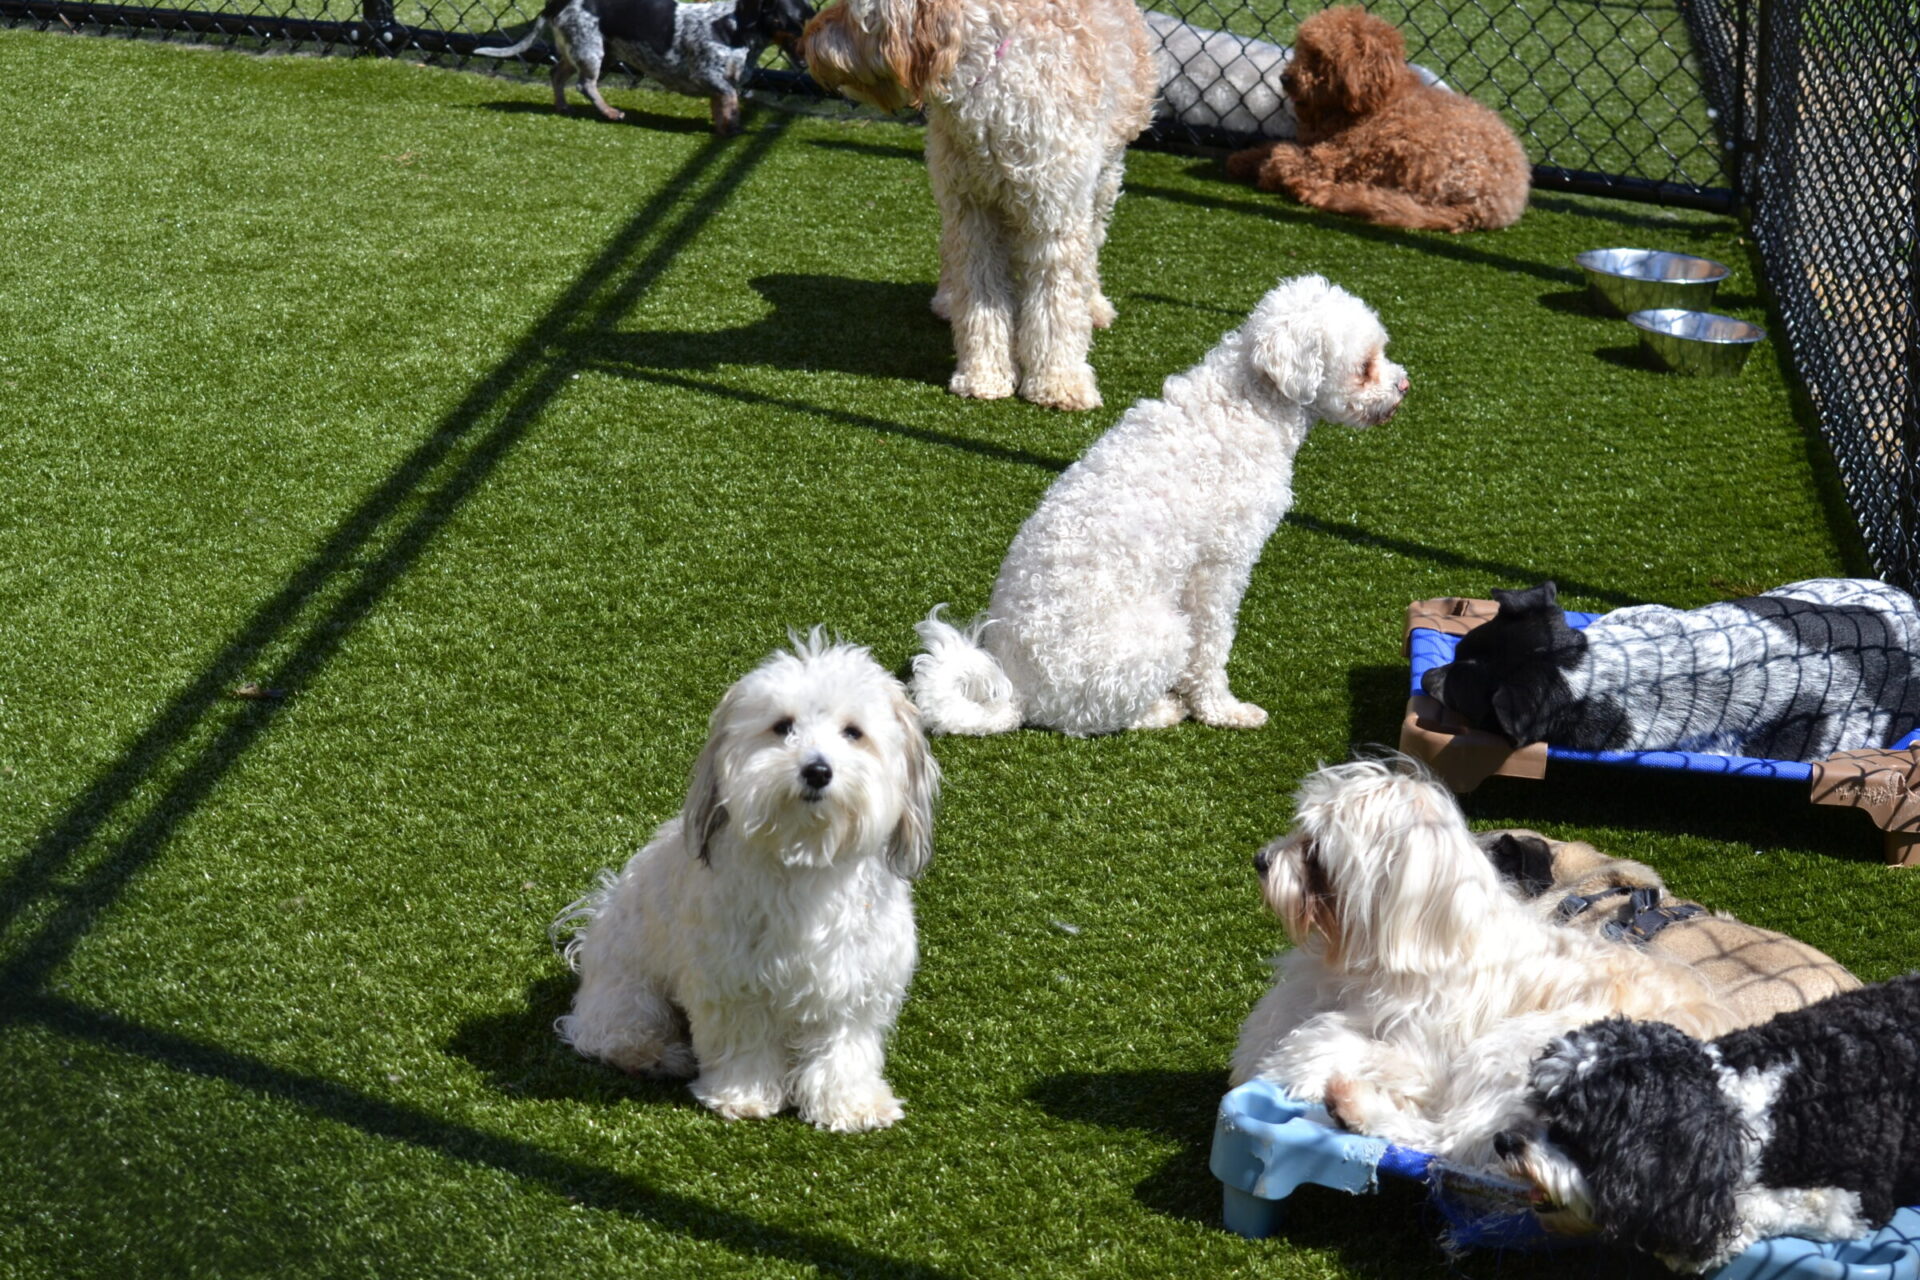 The image features multiple dogs in a sunny artificial grass enclosure with water bowls, some playfully interacting, while others rest peacefully.